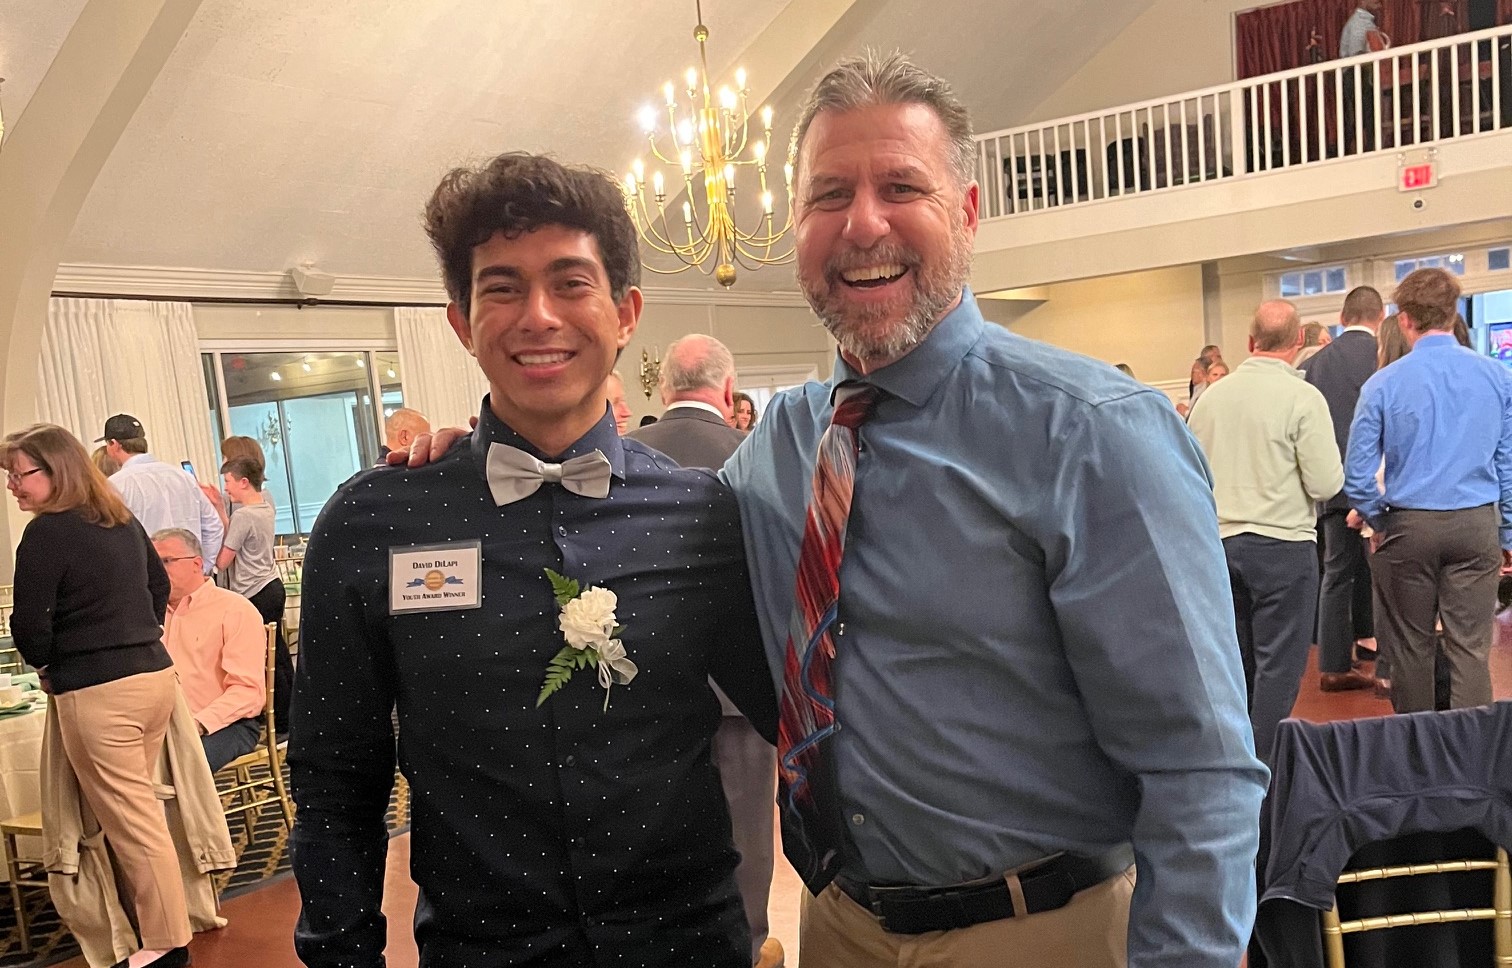 The 39th Annual Putnam County Youth Bureau Awards Dinner honored PVHS Senior David DiLapi. David has been an active member of the PV Ambulance Corp and a leader in several NHS drives.